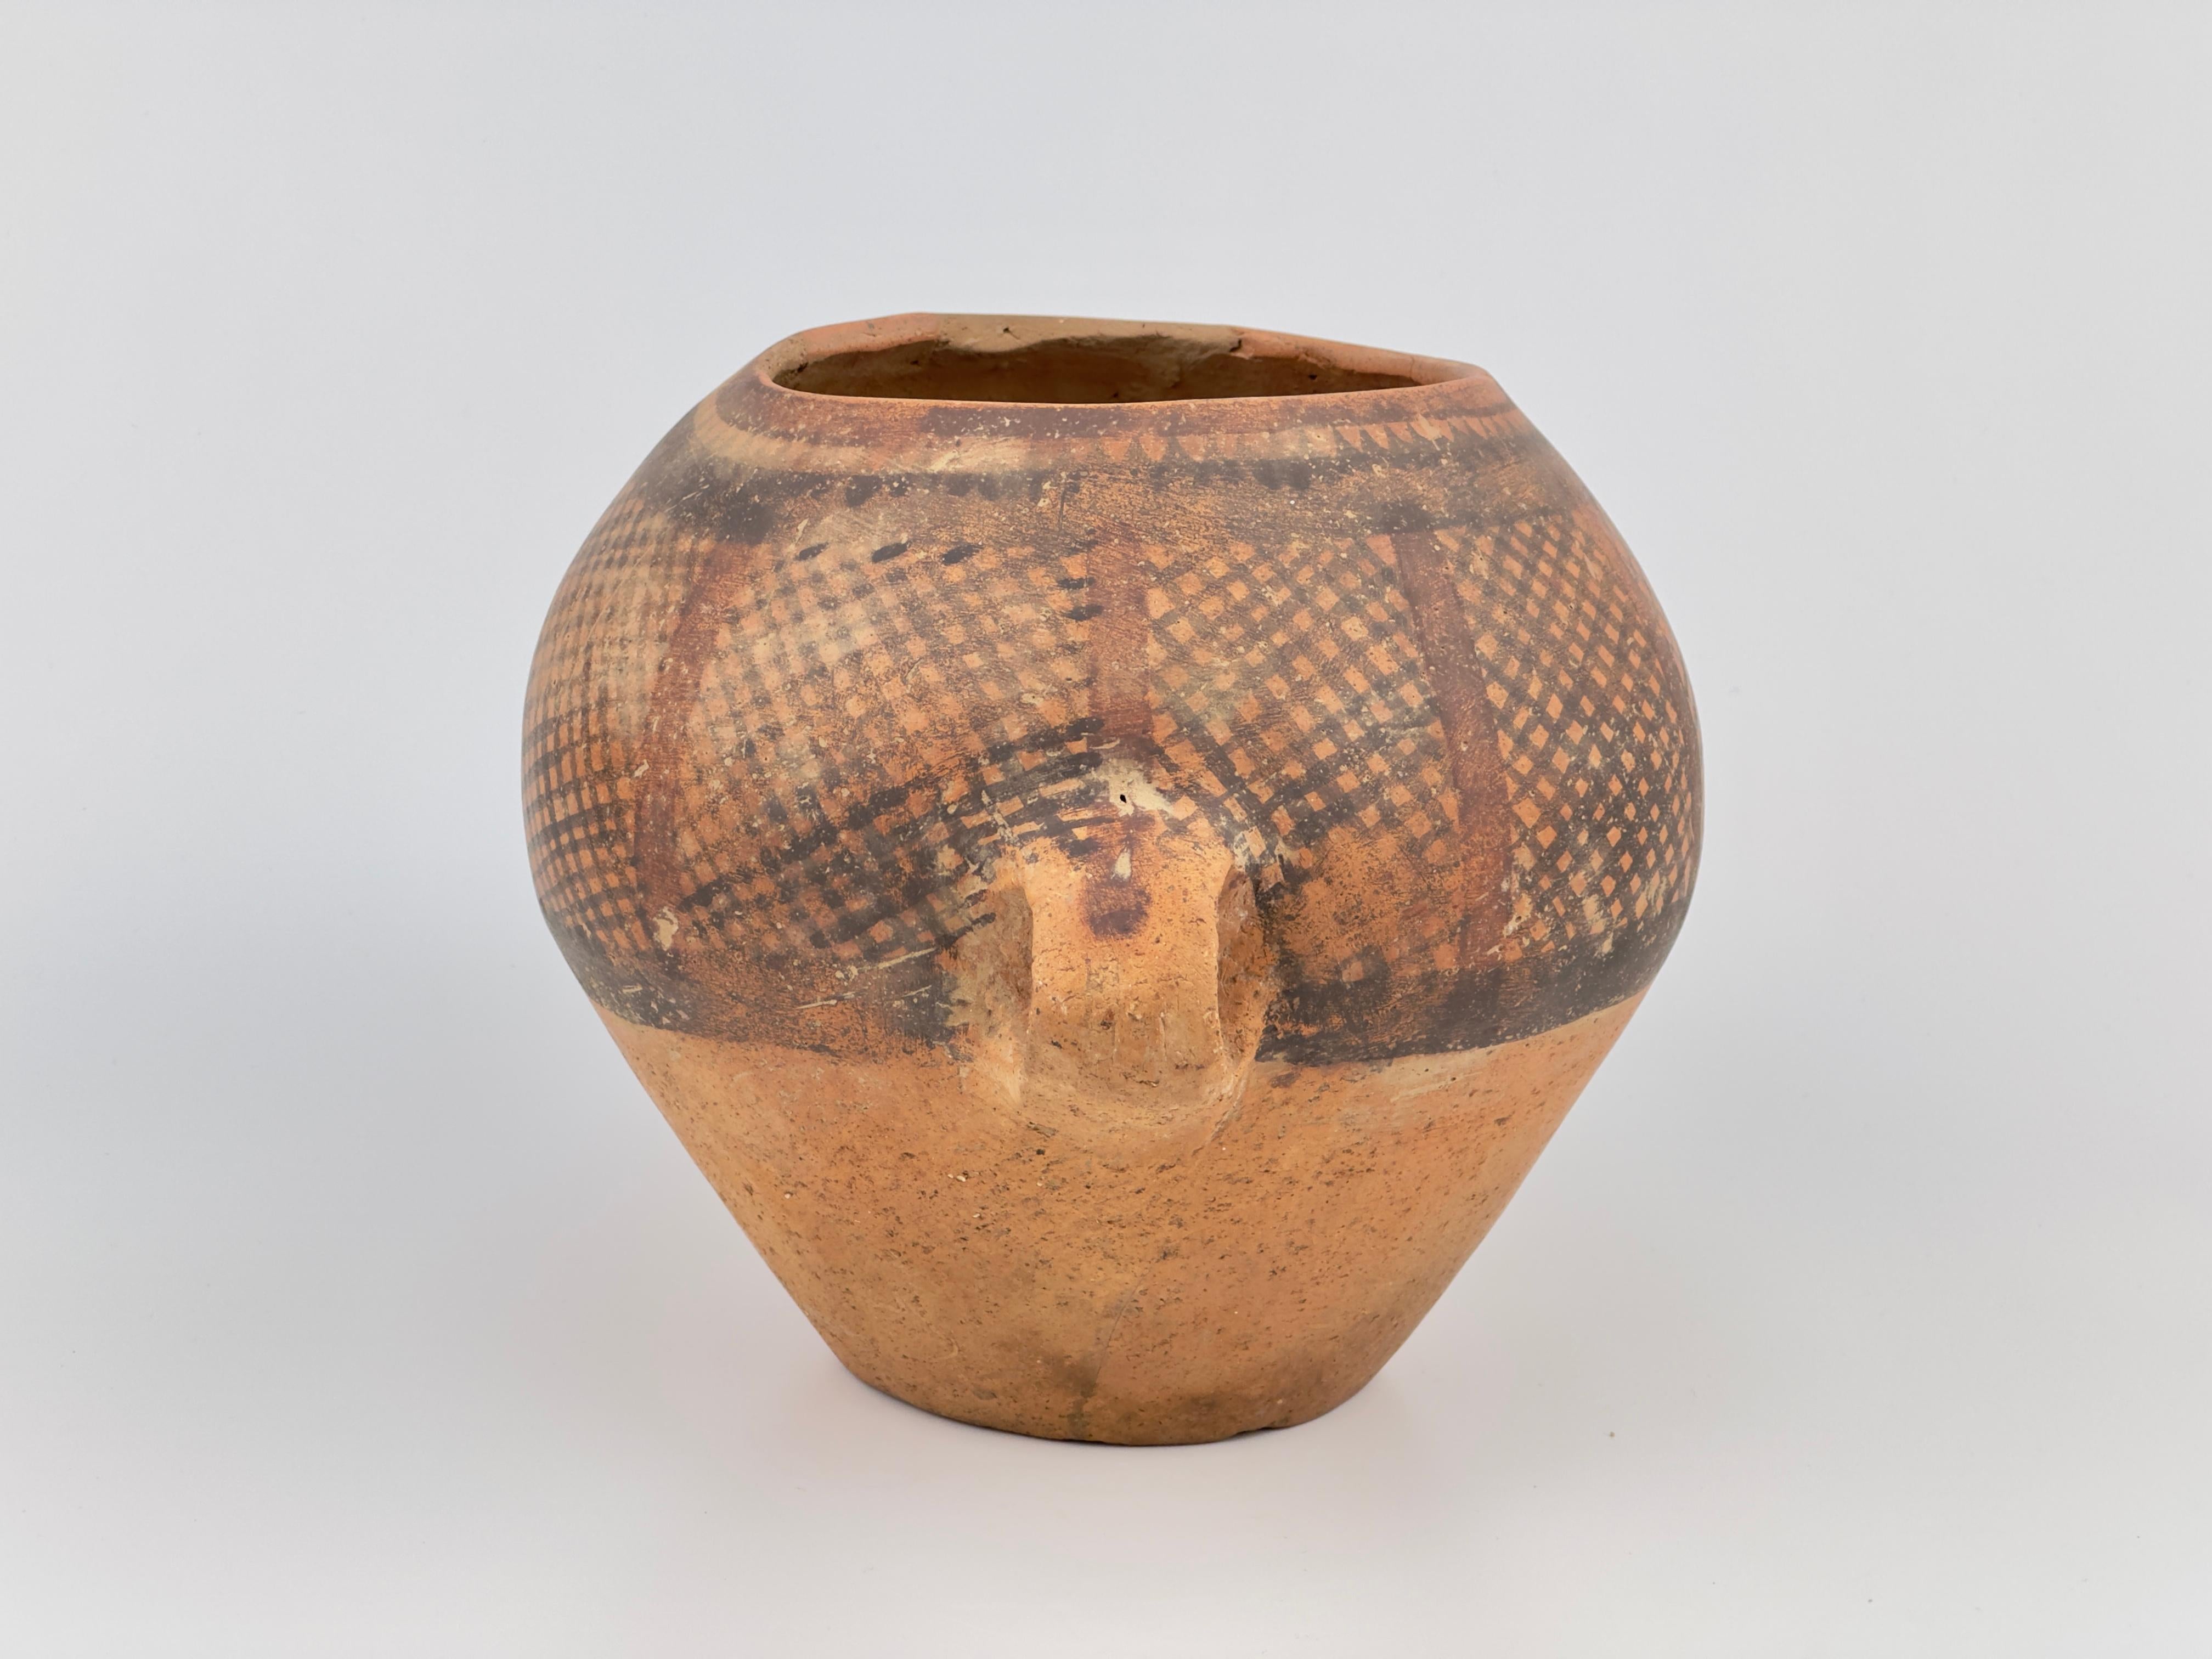 This Neolithic pottery presents a robust form with a rounded bottom, tapering to a wide, open top. It features two small loop handles symmetrically placed on either side. The vessel's surface displays an elaborate pattern created through a technique